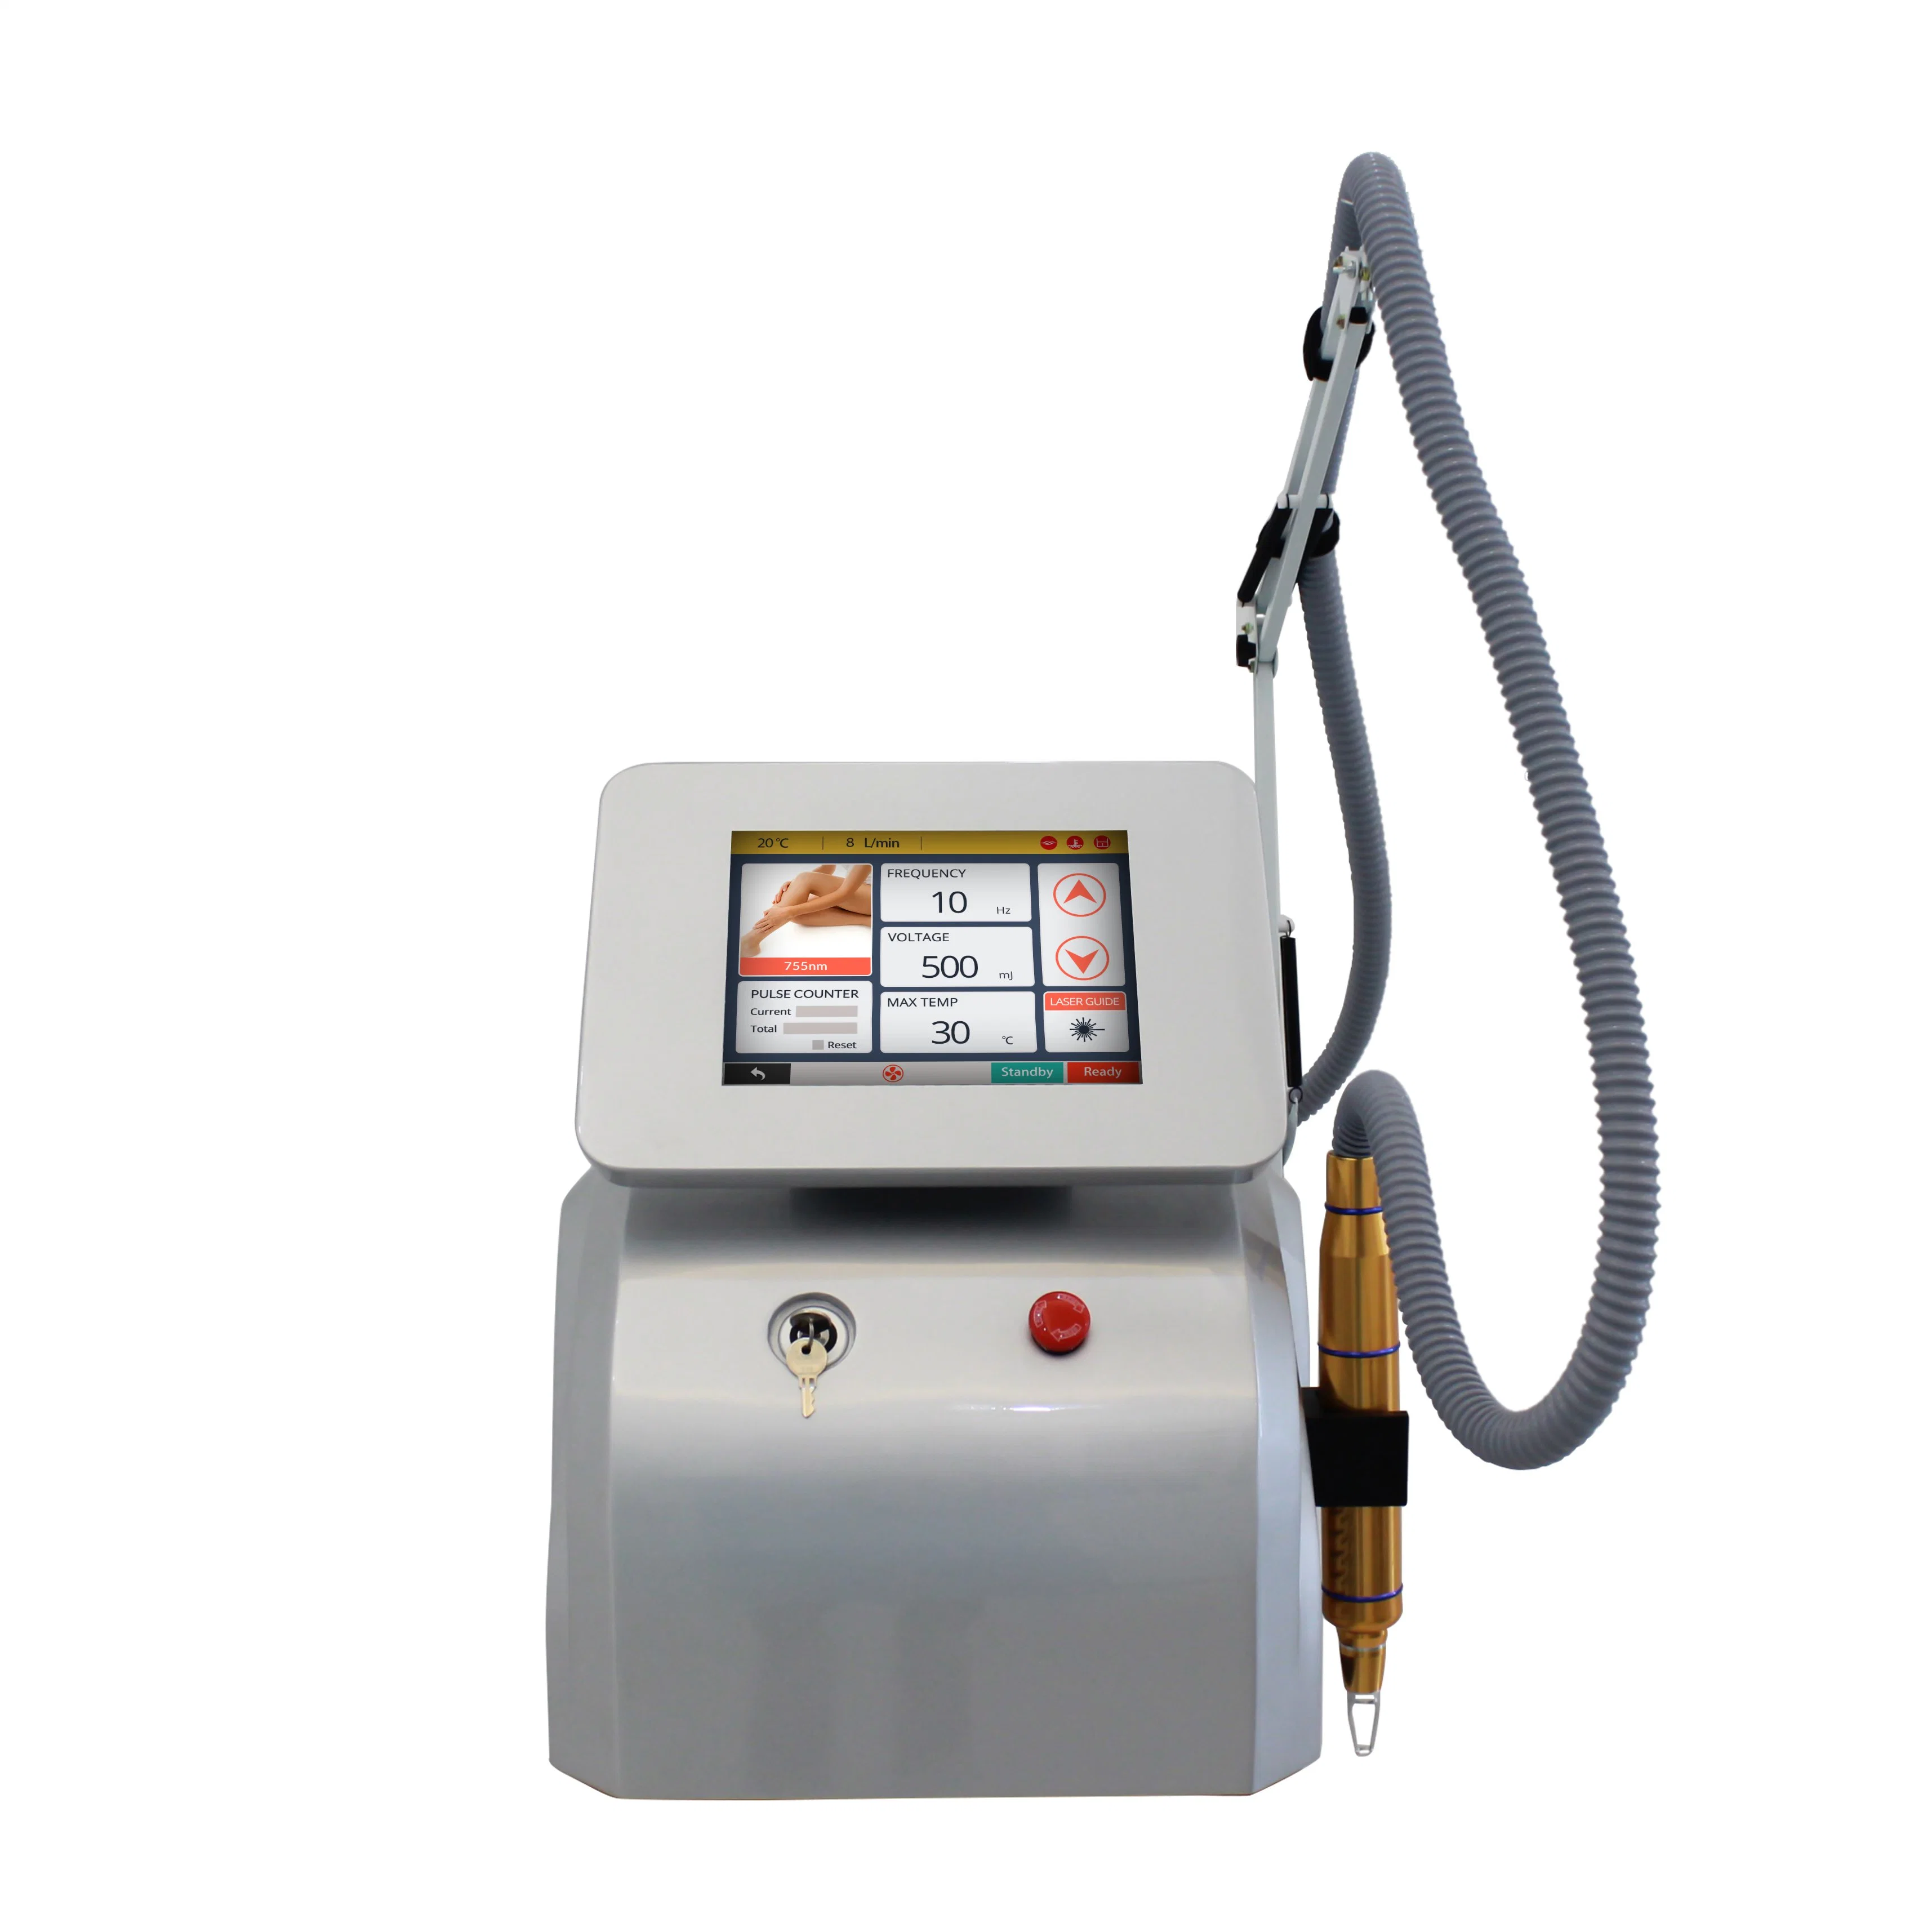 The Best Effective Tattoo Removal Machine Pico Laser Pigment Removal Machine